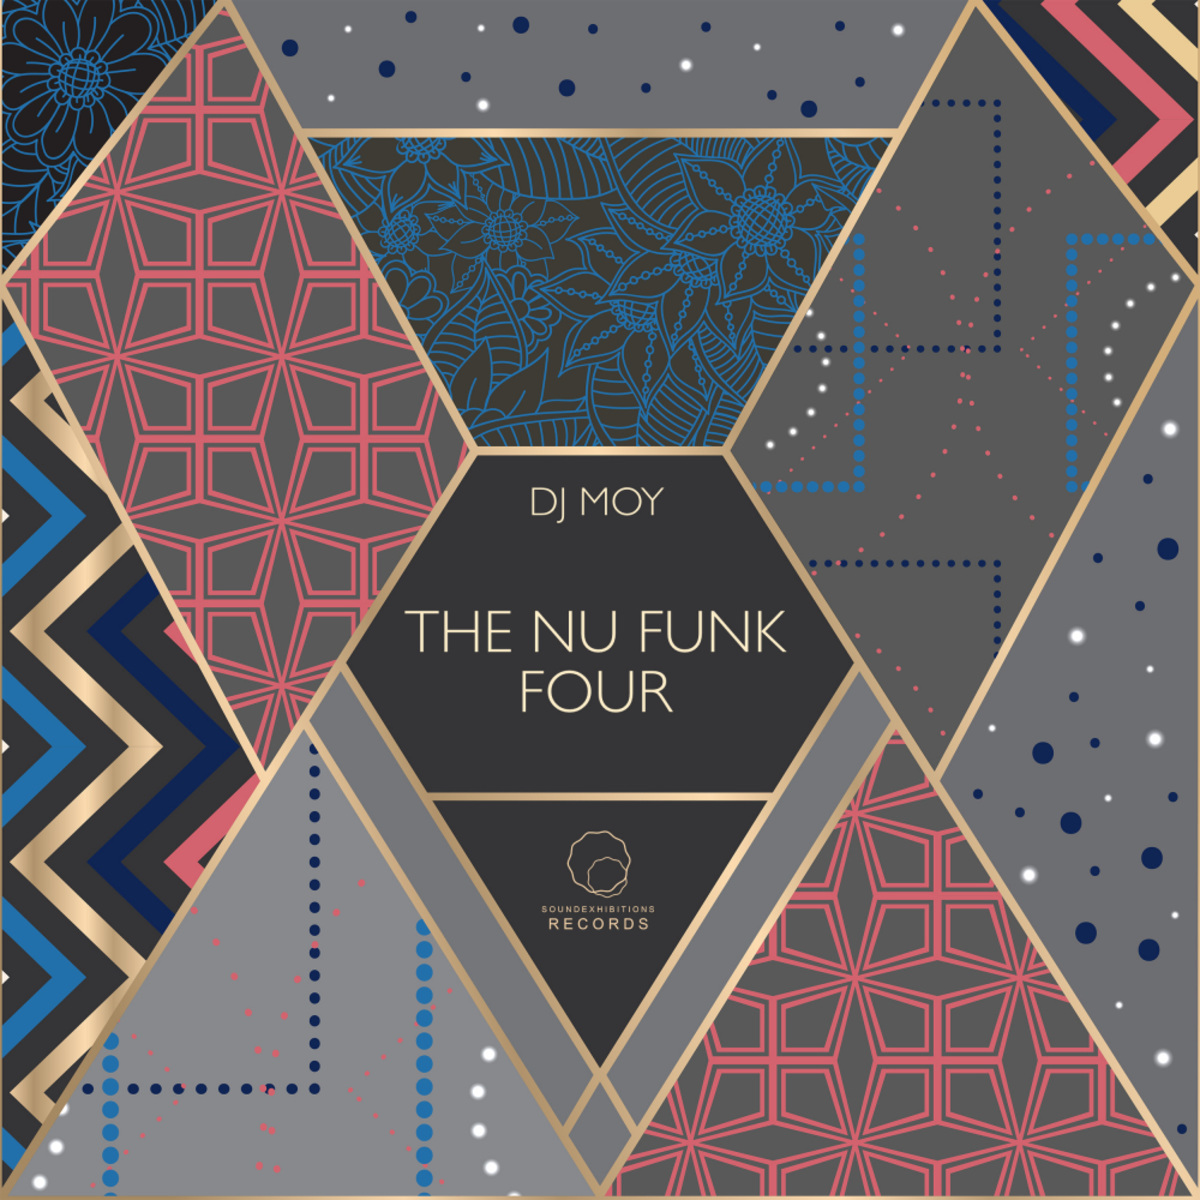 Dj Moy - The Nu Funk Four / Sound-Exhibitions-Records